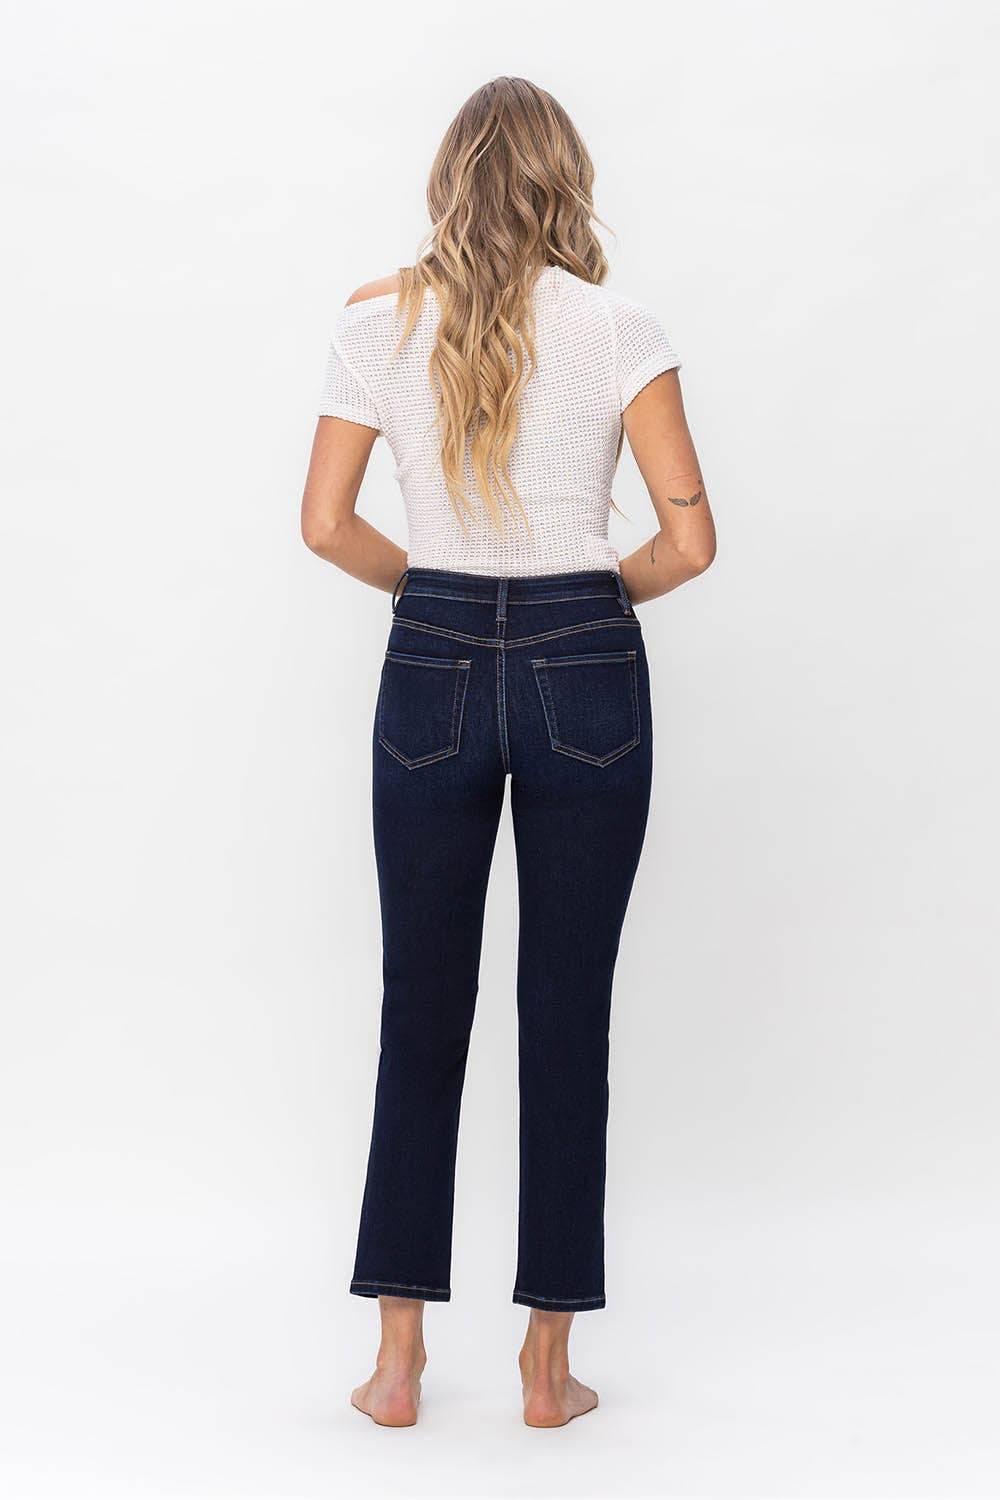 The Nola Ankle Jean